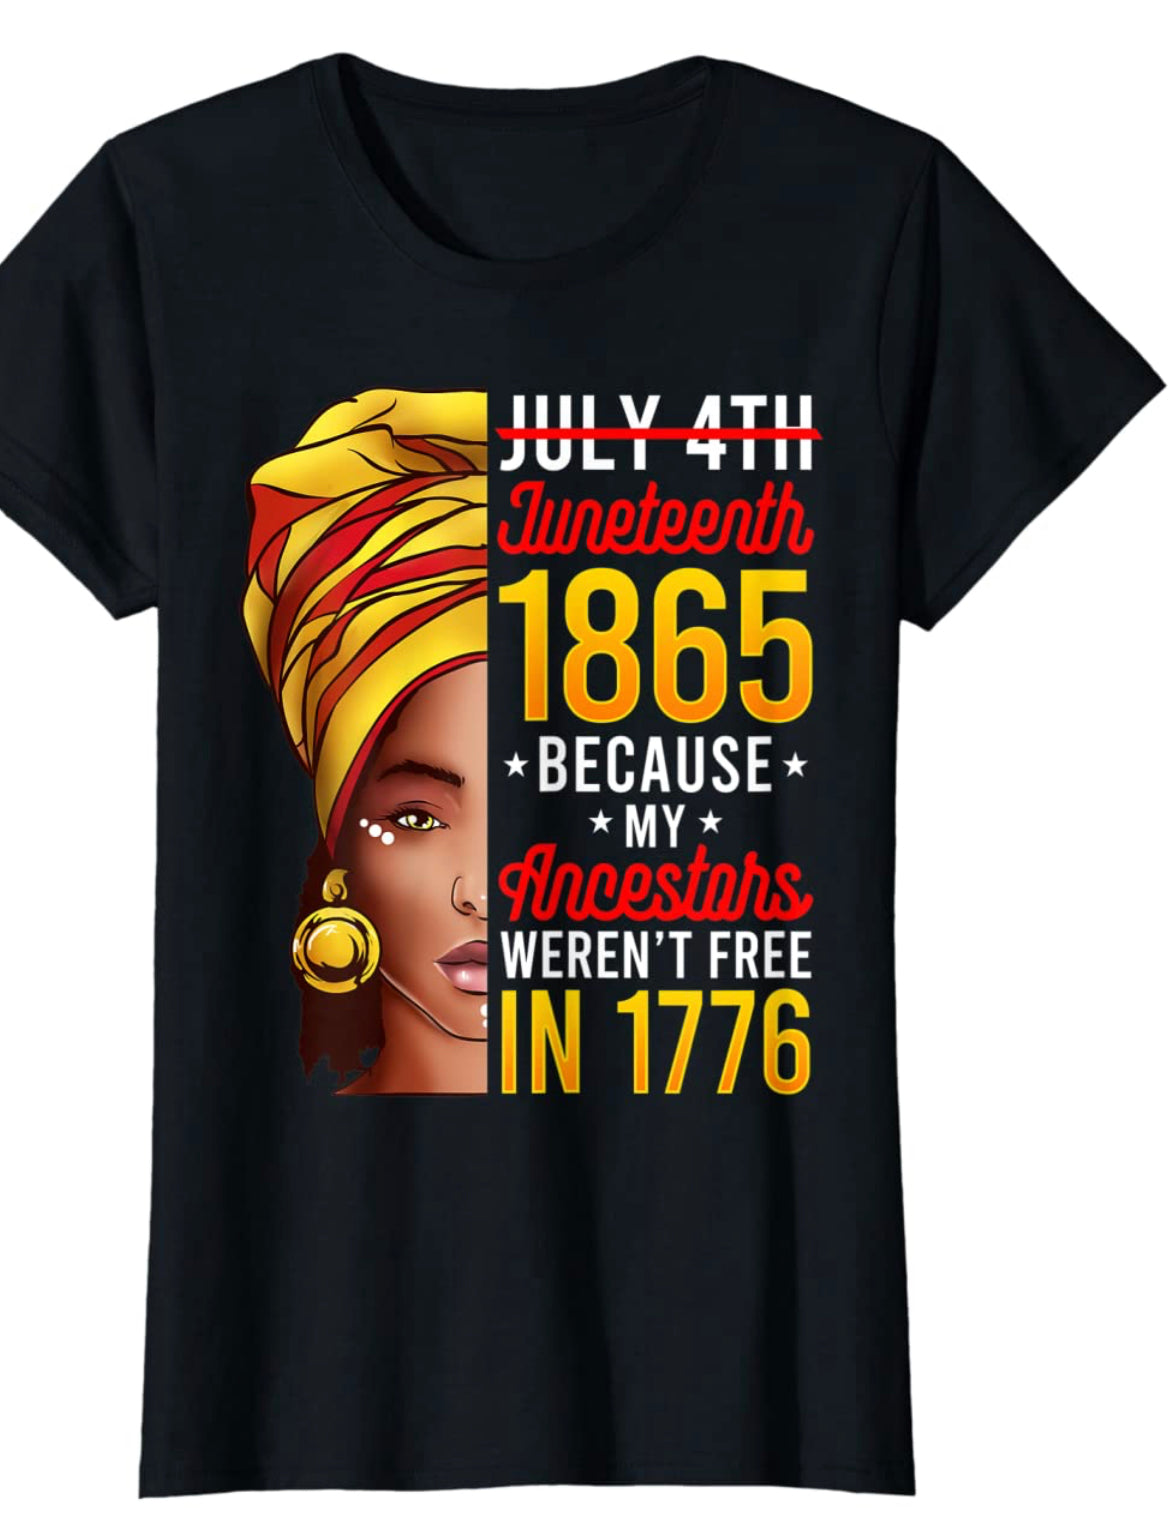 Final Sale Plus Size "Juneteenth African American" T-Shirt in Black